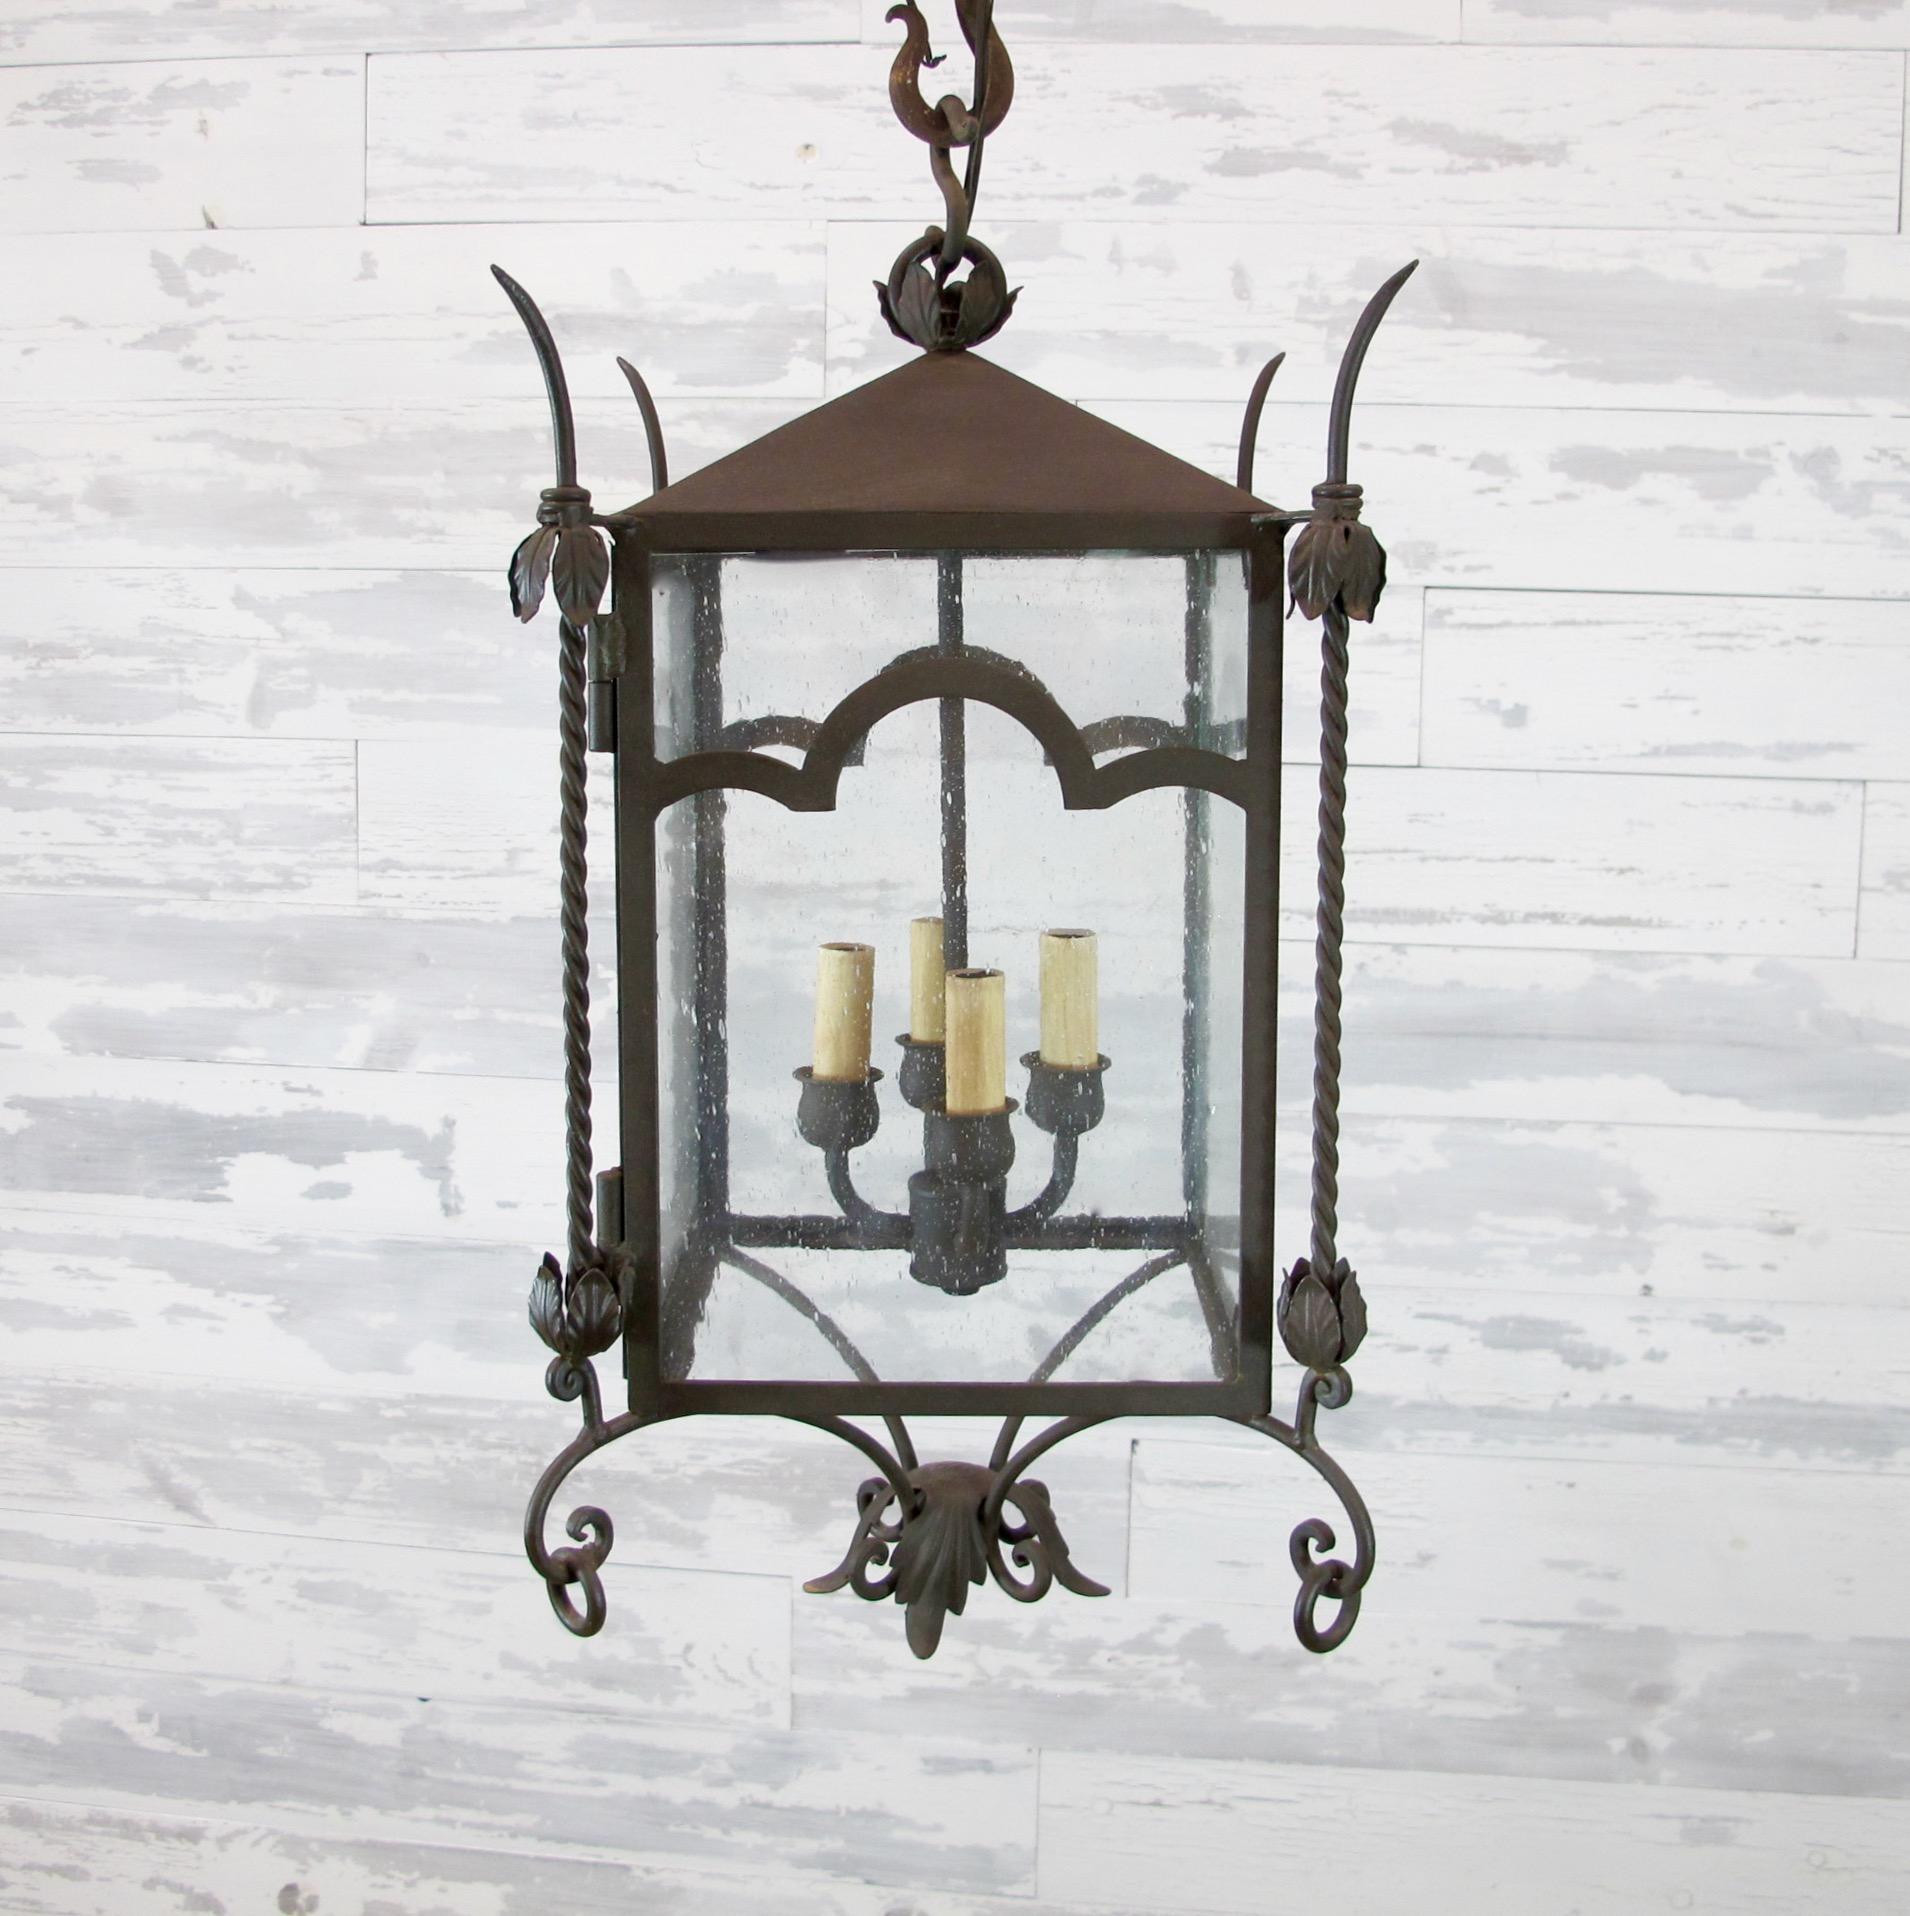 Part of the chandelier product line, this is our Lori lantern, small. This fixture can be used for Interior or exterior use and is UL listed. 3' chain included. Four candelabra base bulbs up to 60 watts/socket. Also available in small size. This